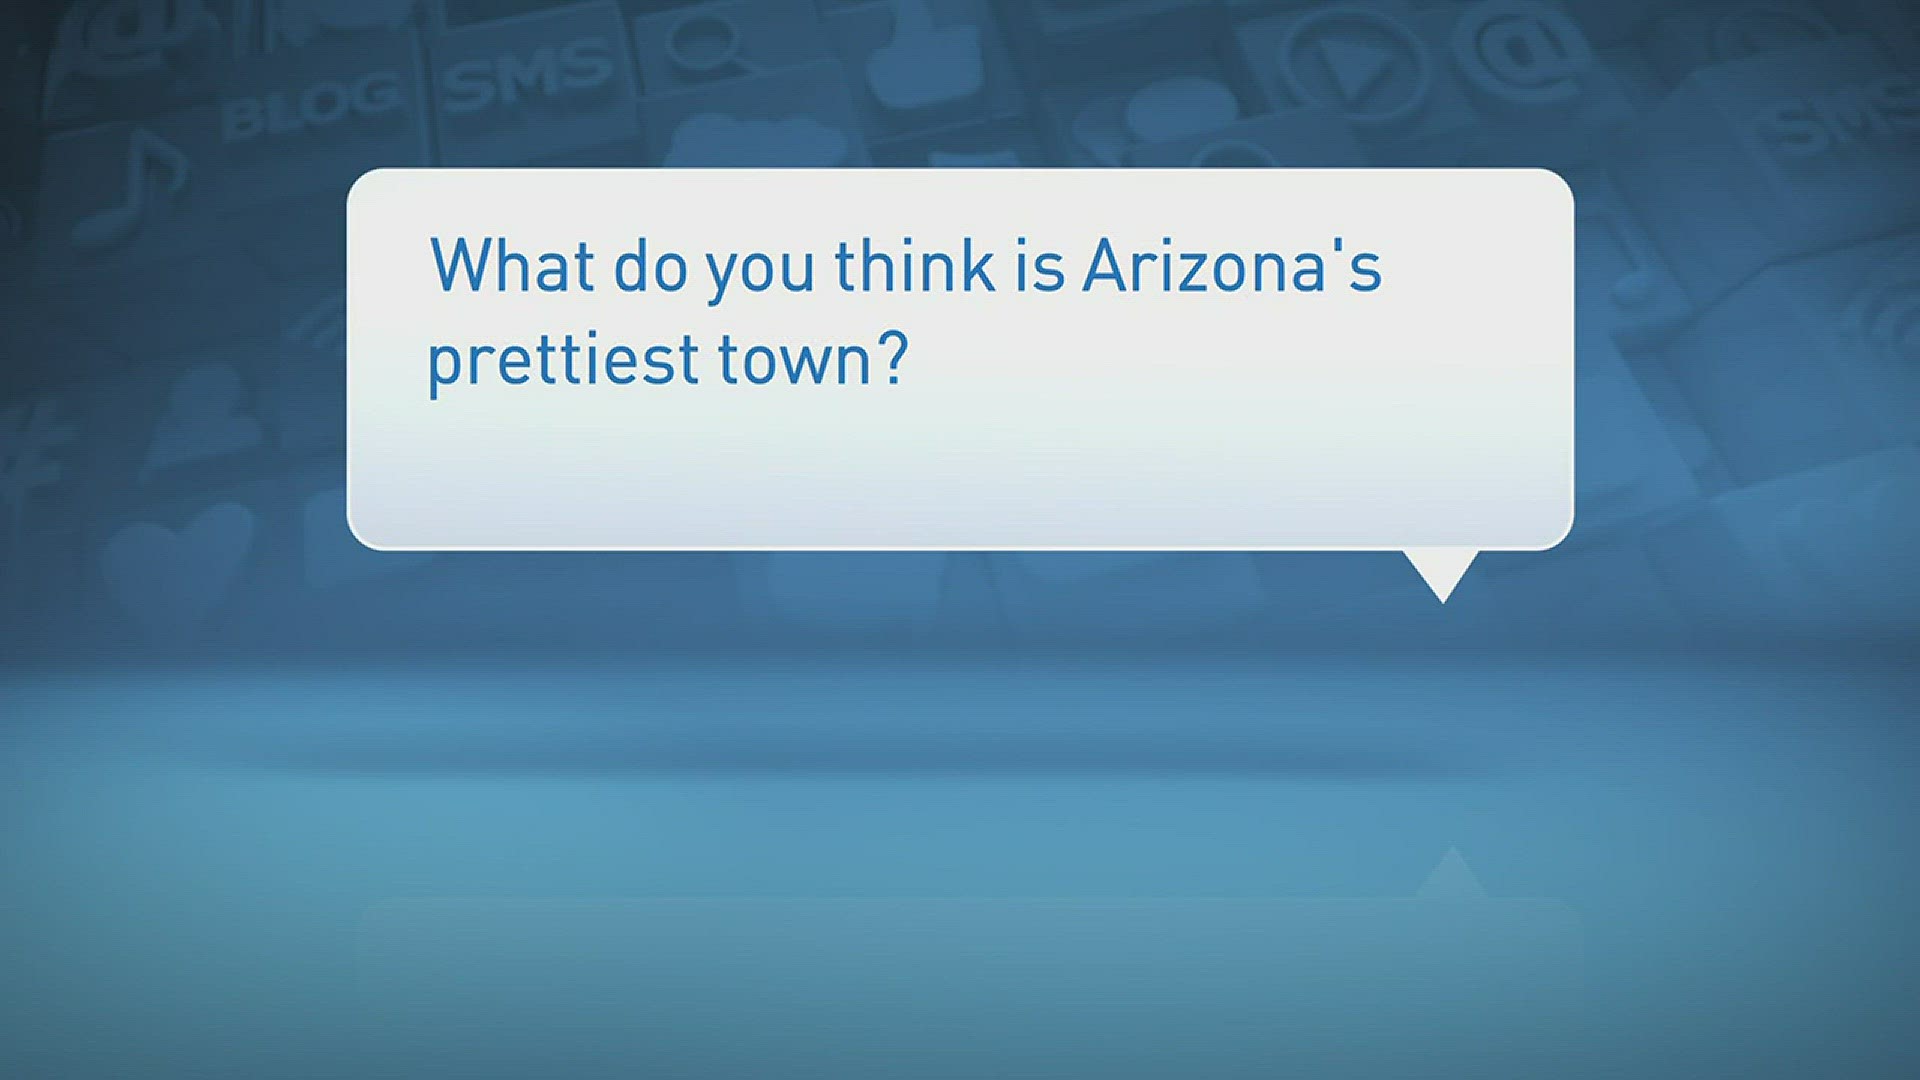 Turns out Arizona's prettiest town is not Sedona.